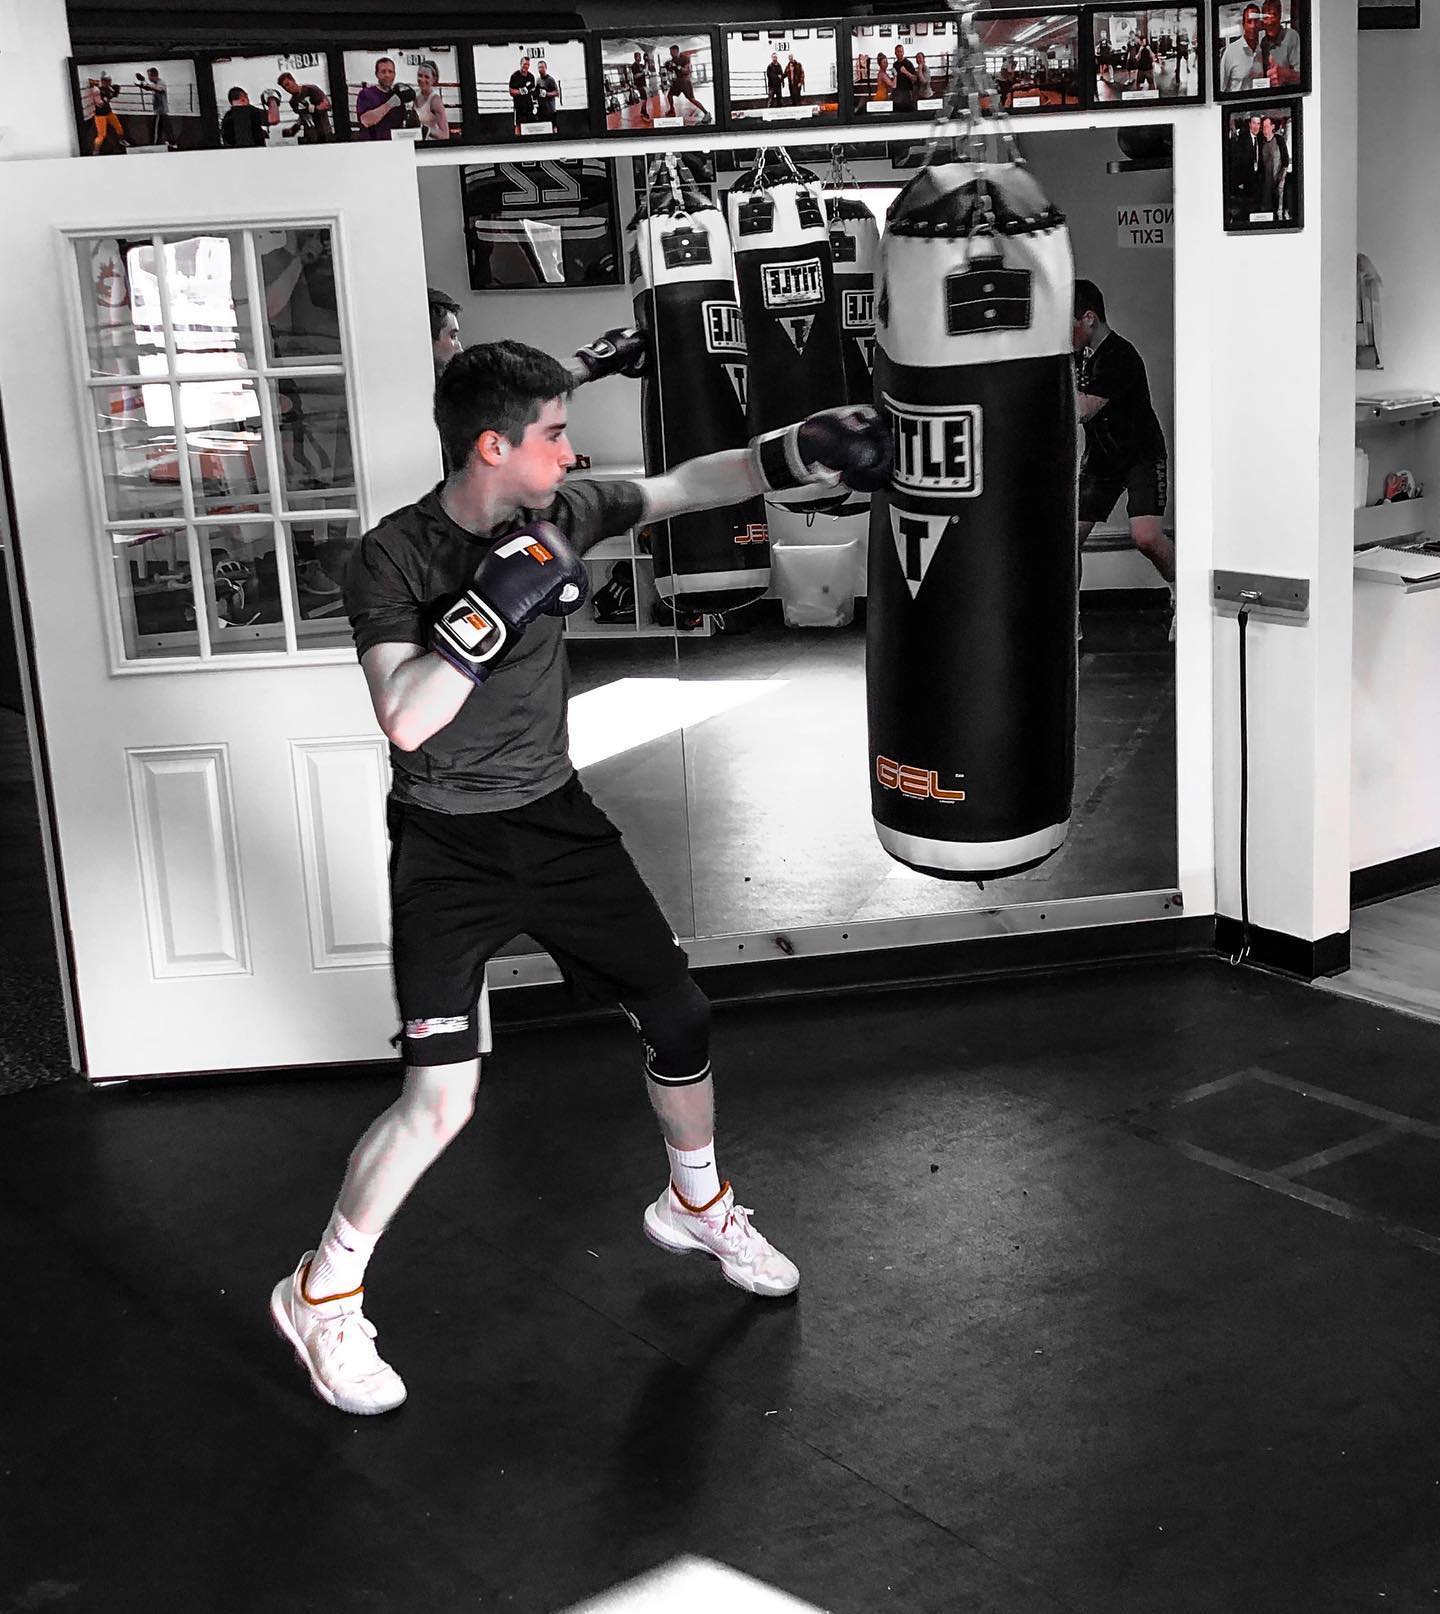 It’s been a long few months with no sports activities for theses young athletes. Boxing is one of the best cross-training for Athletes to work on footwork, hand-speed, explosiveness, breathing, balance, and build self-confidence. Contact us Today for more information on how to sign your athlete up for One -on-One Boxing sessions . Call or Text (781)727-9503 or email fitbox@outlook.com